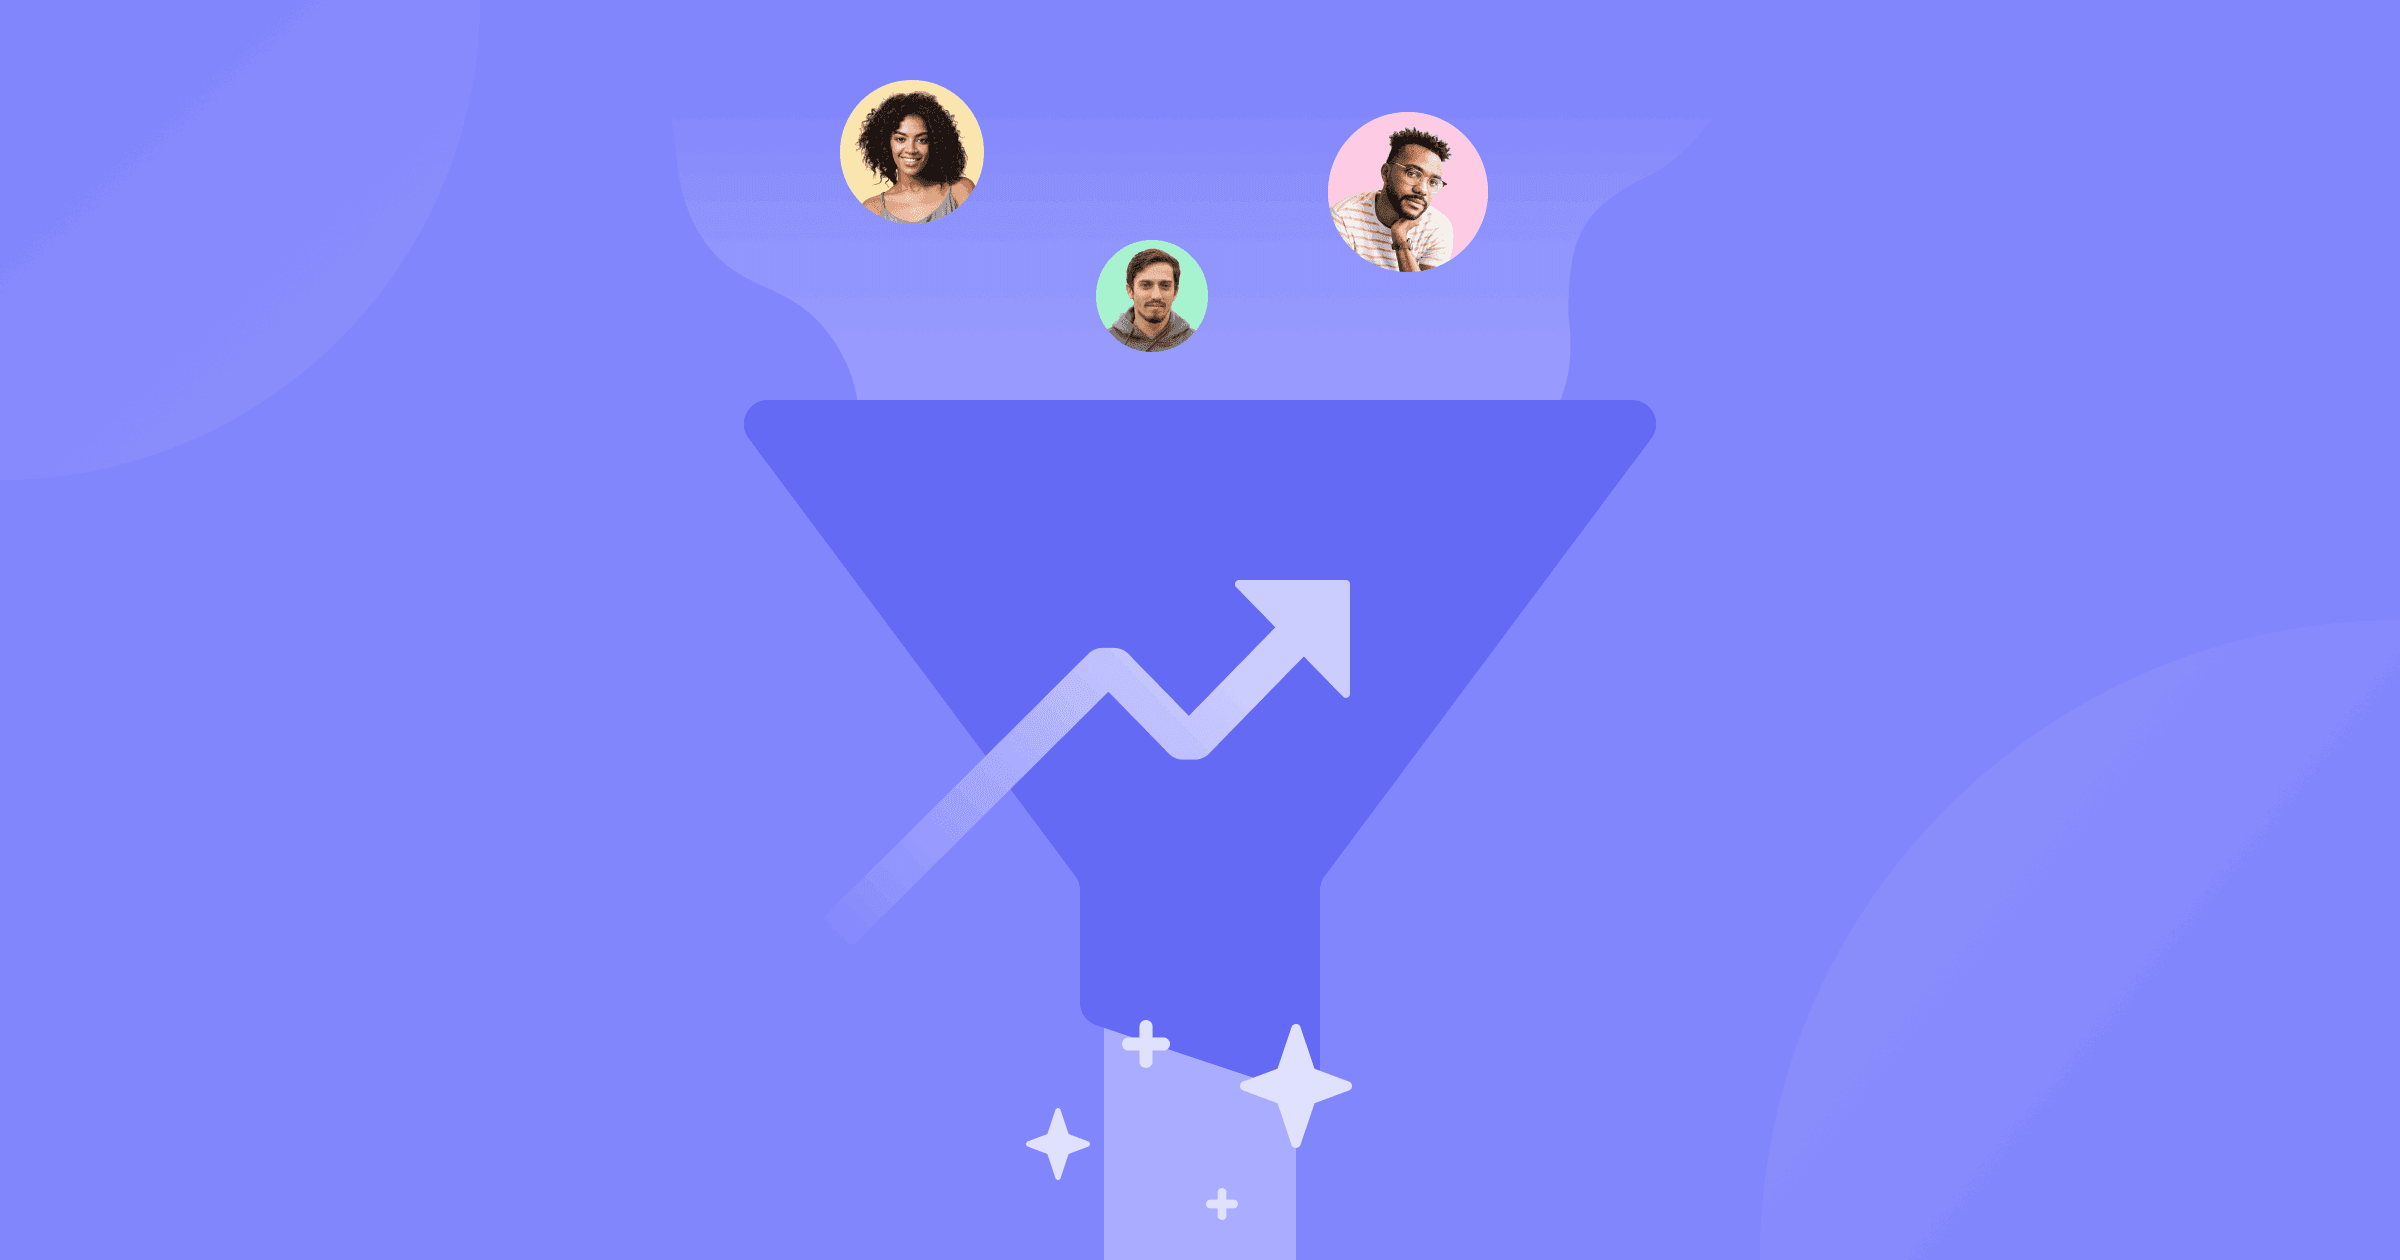 Three user avatars going inside a sales funnel